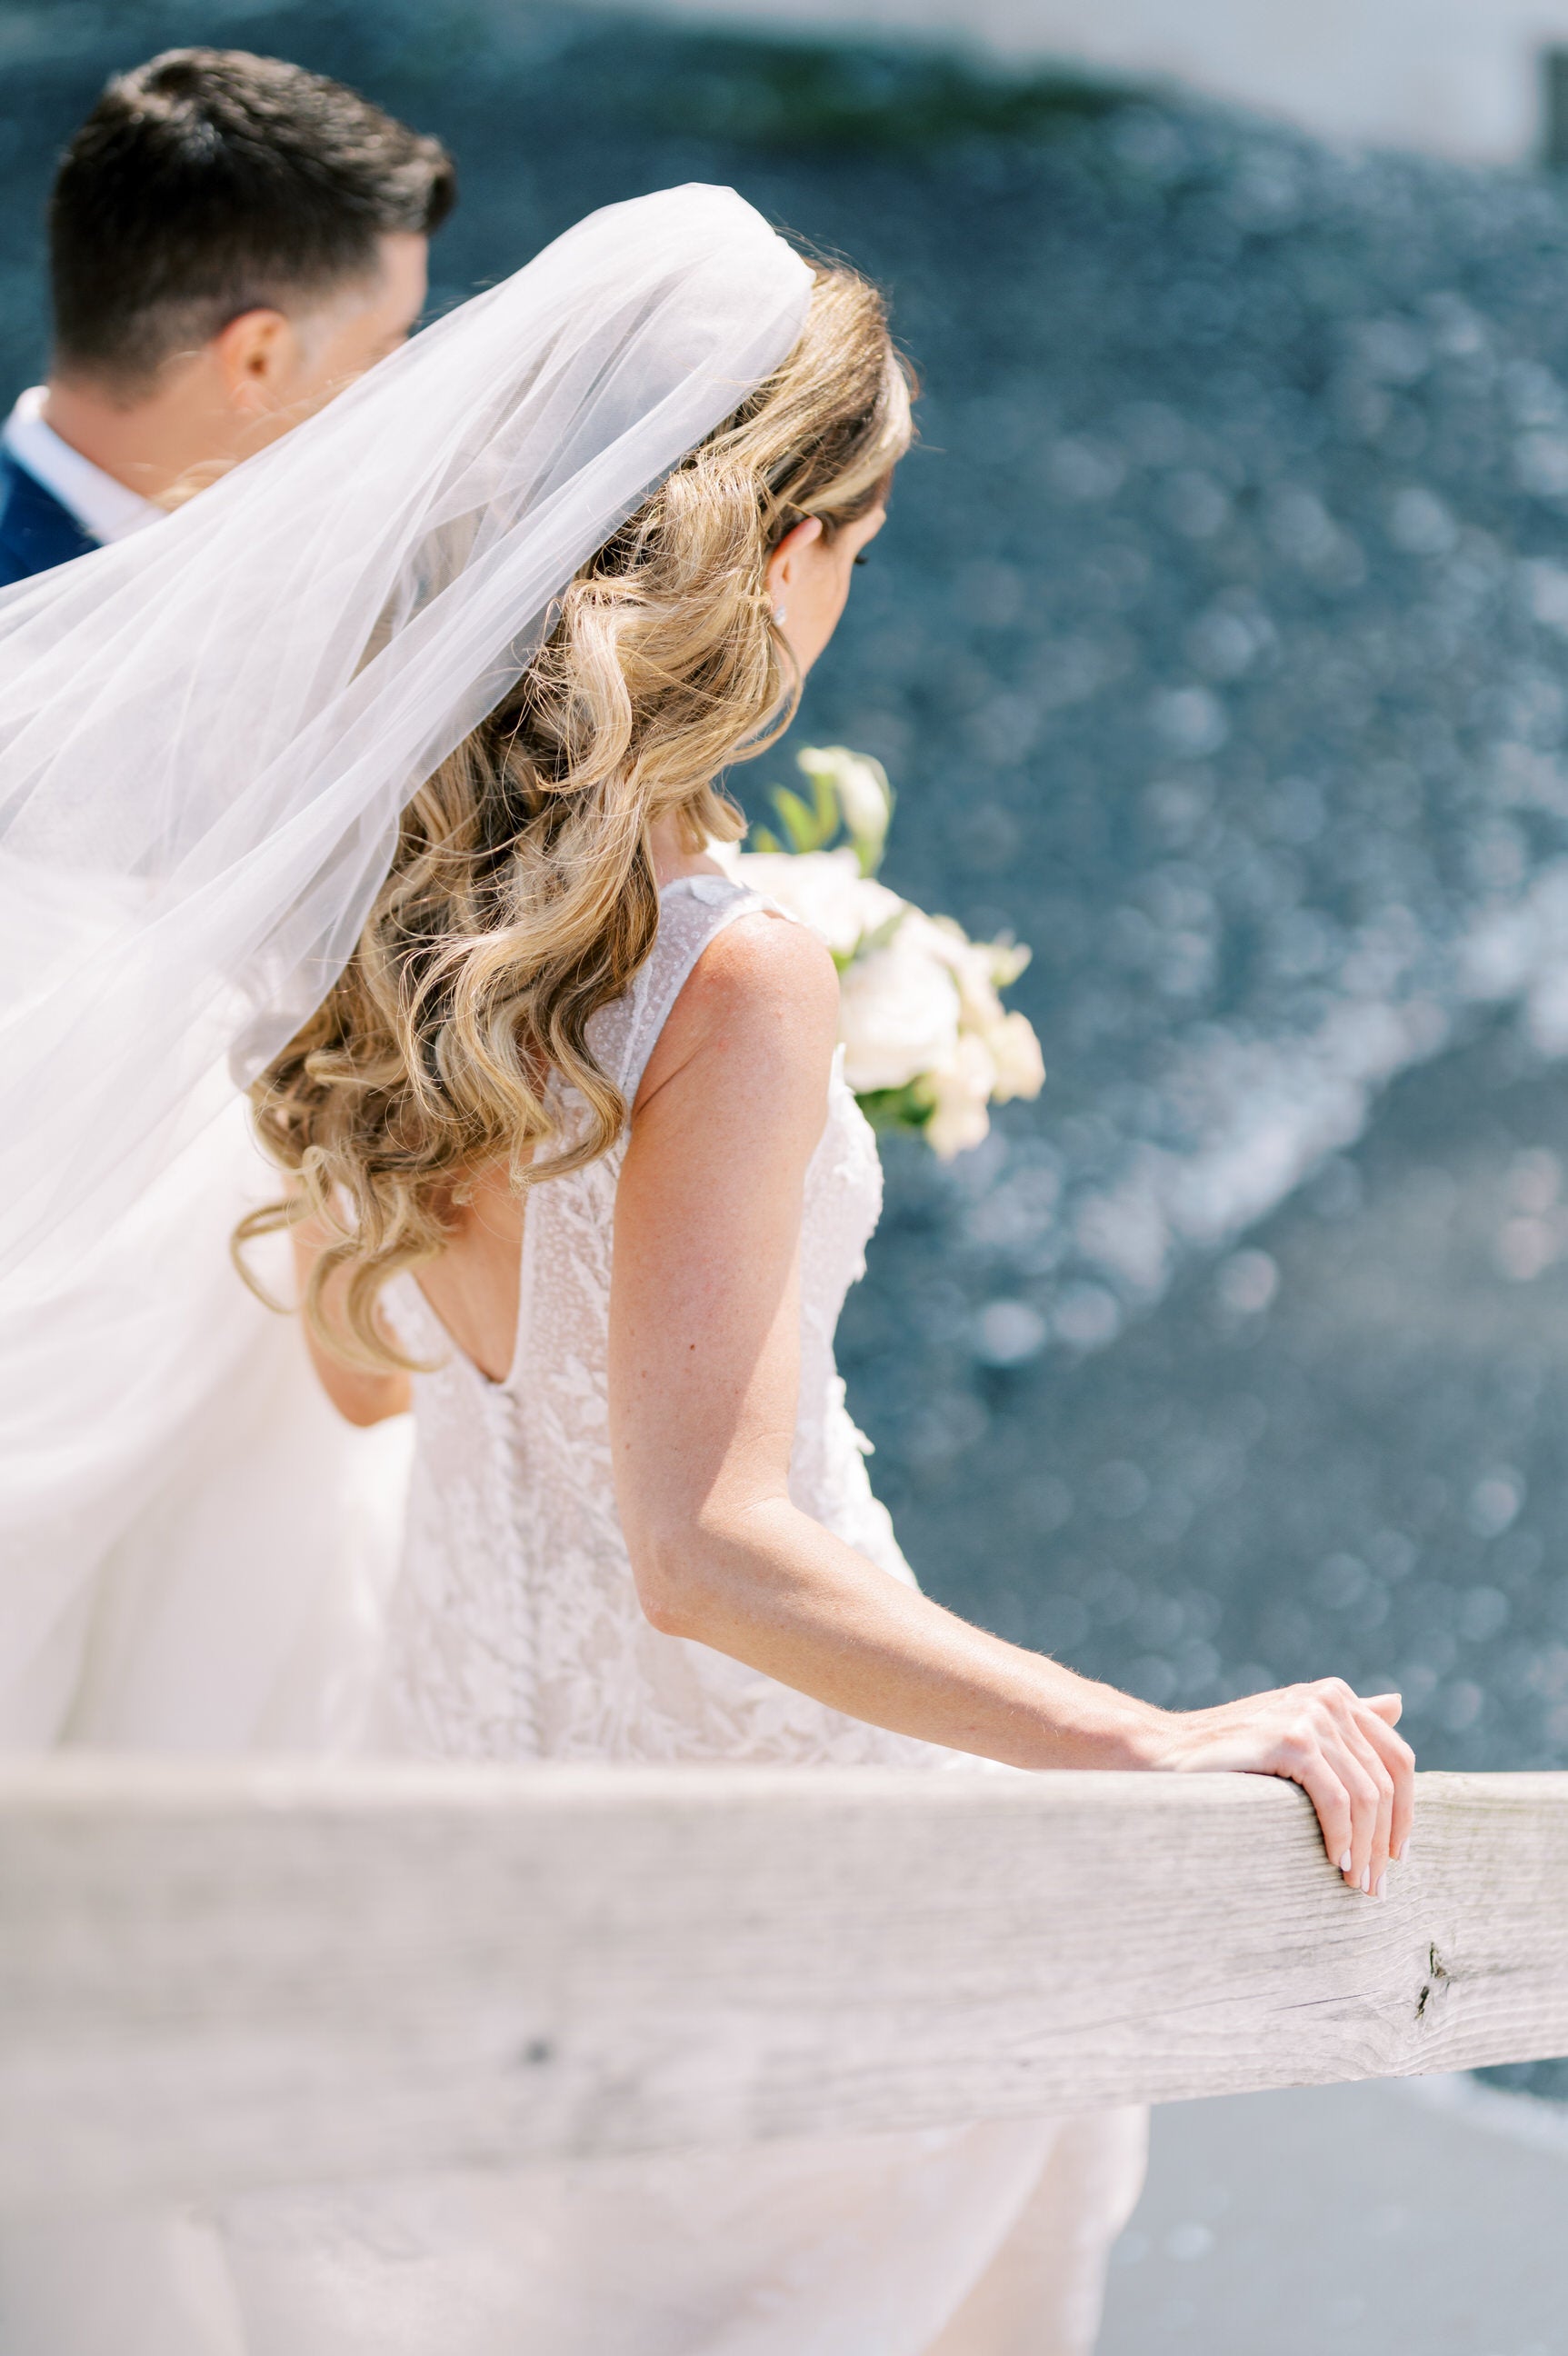 How to Attach the Wedding Veil to Your Hair: Best Tips – One